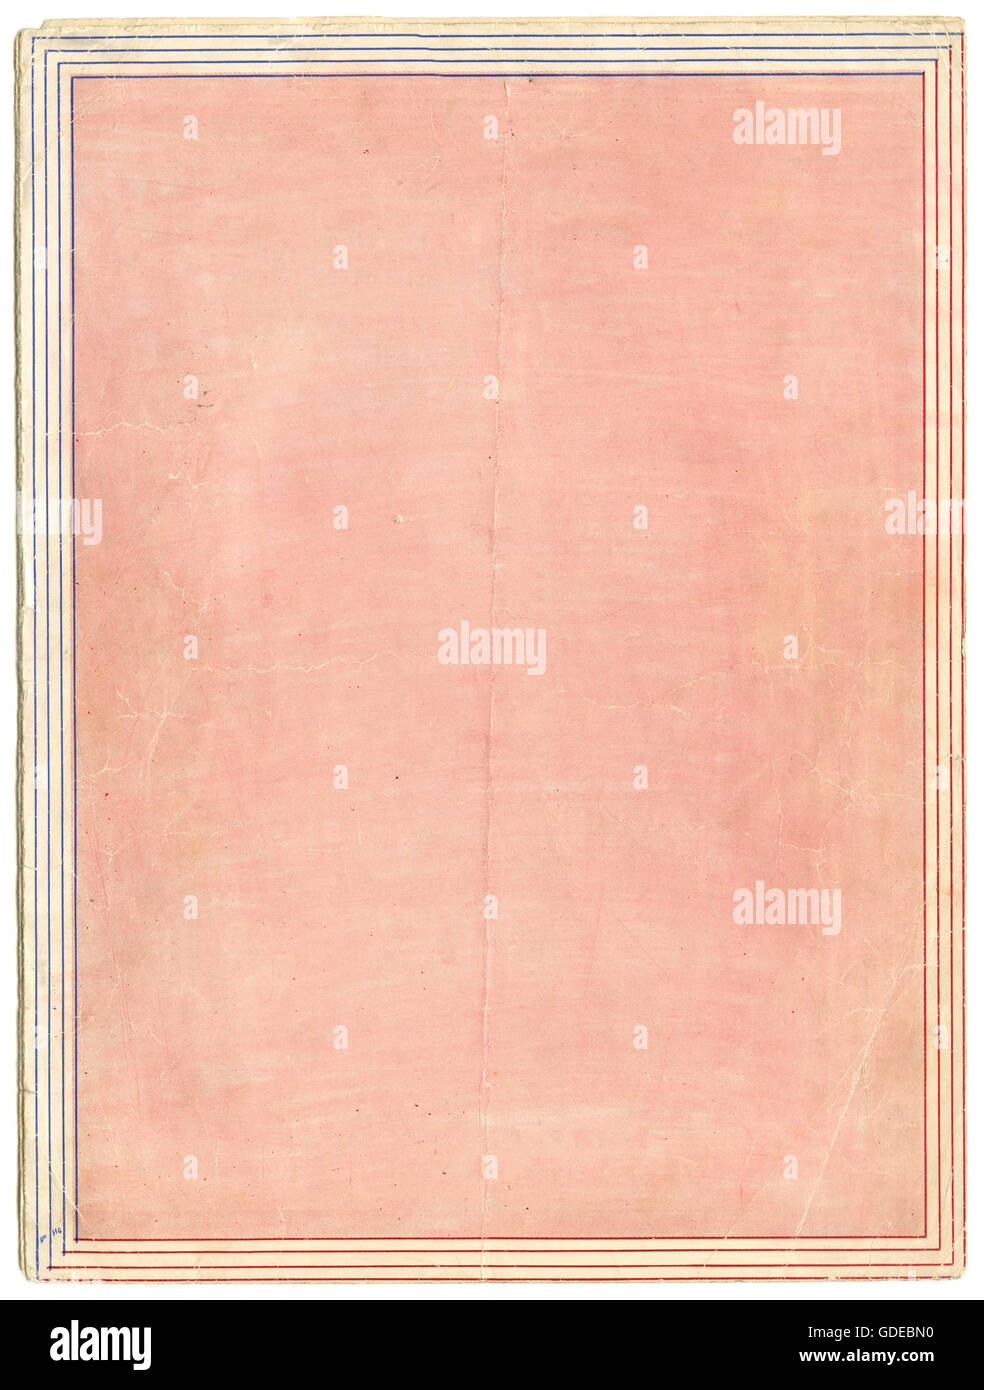 Vintage pink printed paper with red and blue lined border Stock Photo